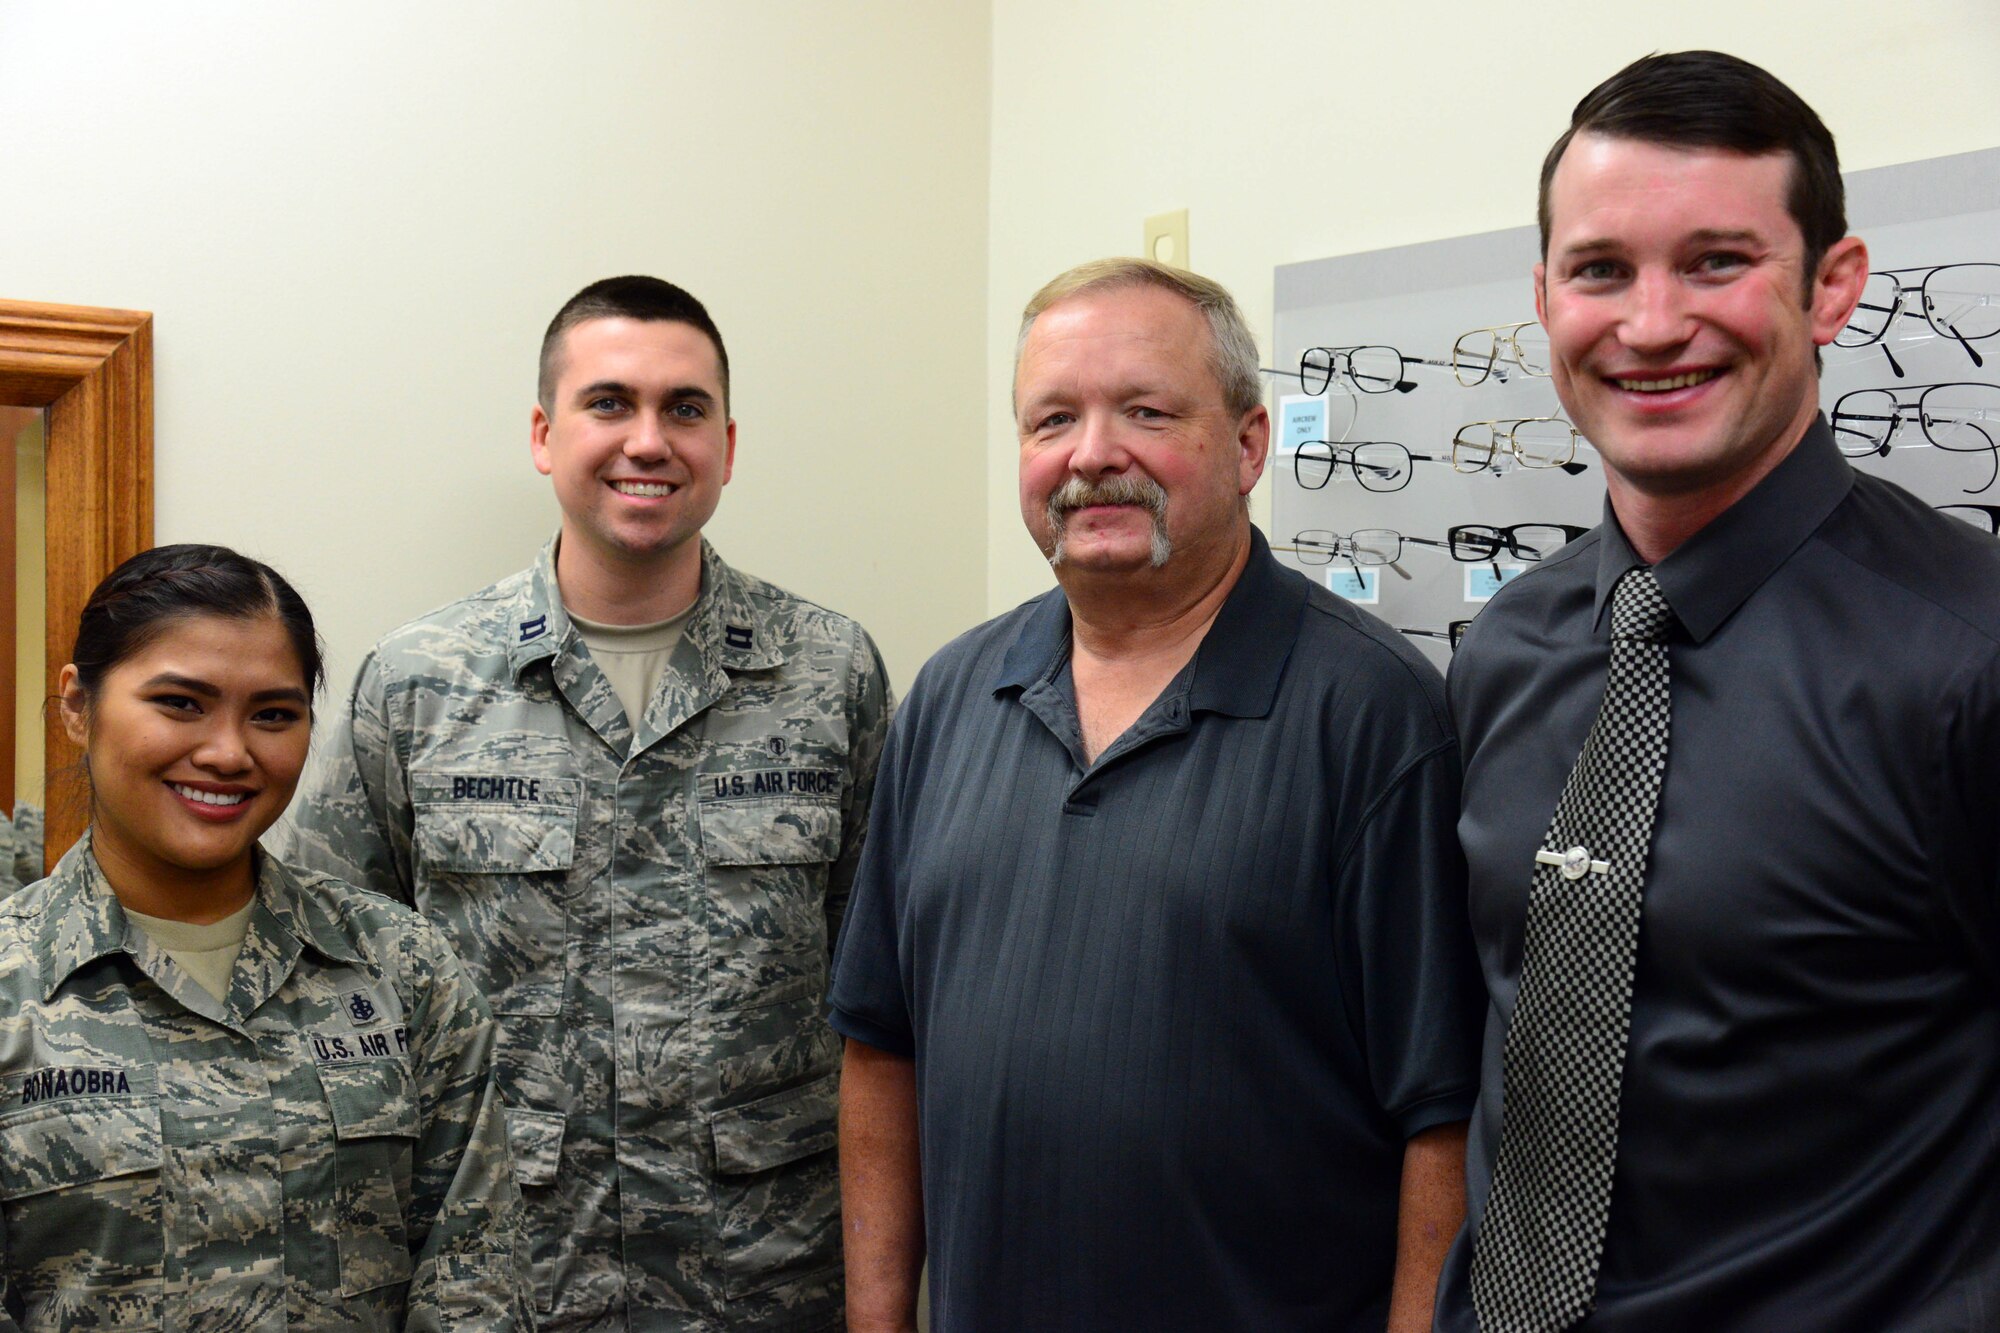 John Dresel, 341st Medical Operations Squadron optometry technician, center, poses for a photo with his optometry teammates, Nov. 2, 2016, at Malmstrom Air Force Base, Mont. The optometry clinic runs as smoothly as possible due to Dresel and his team providing customers with genuine customer care and a smile. (U.S. Air Force photo/Airman 1st Class Magen M. Reeves)